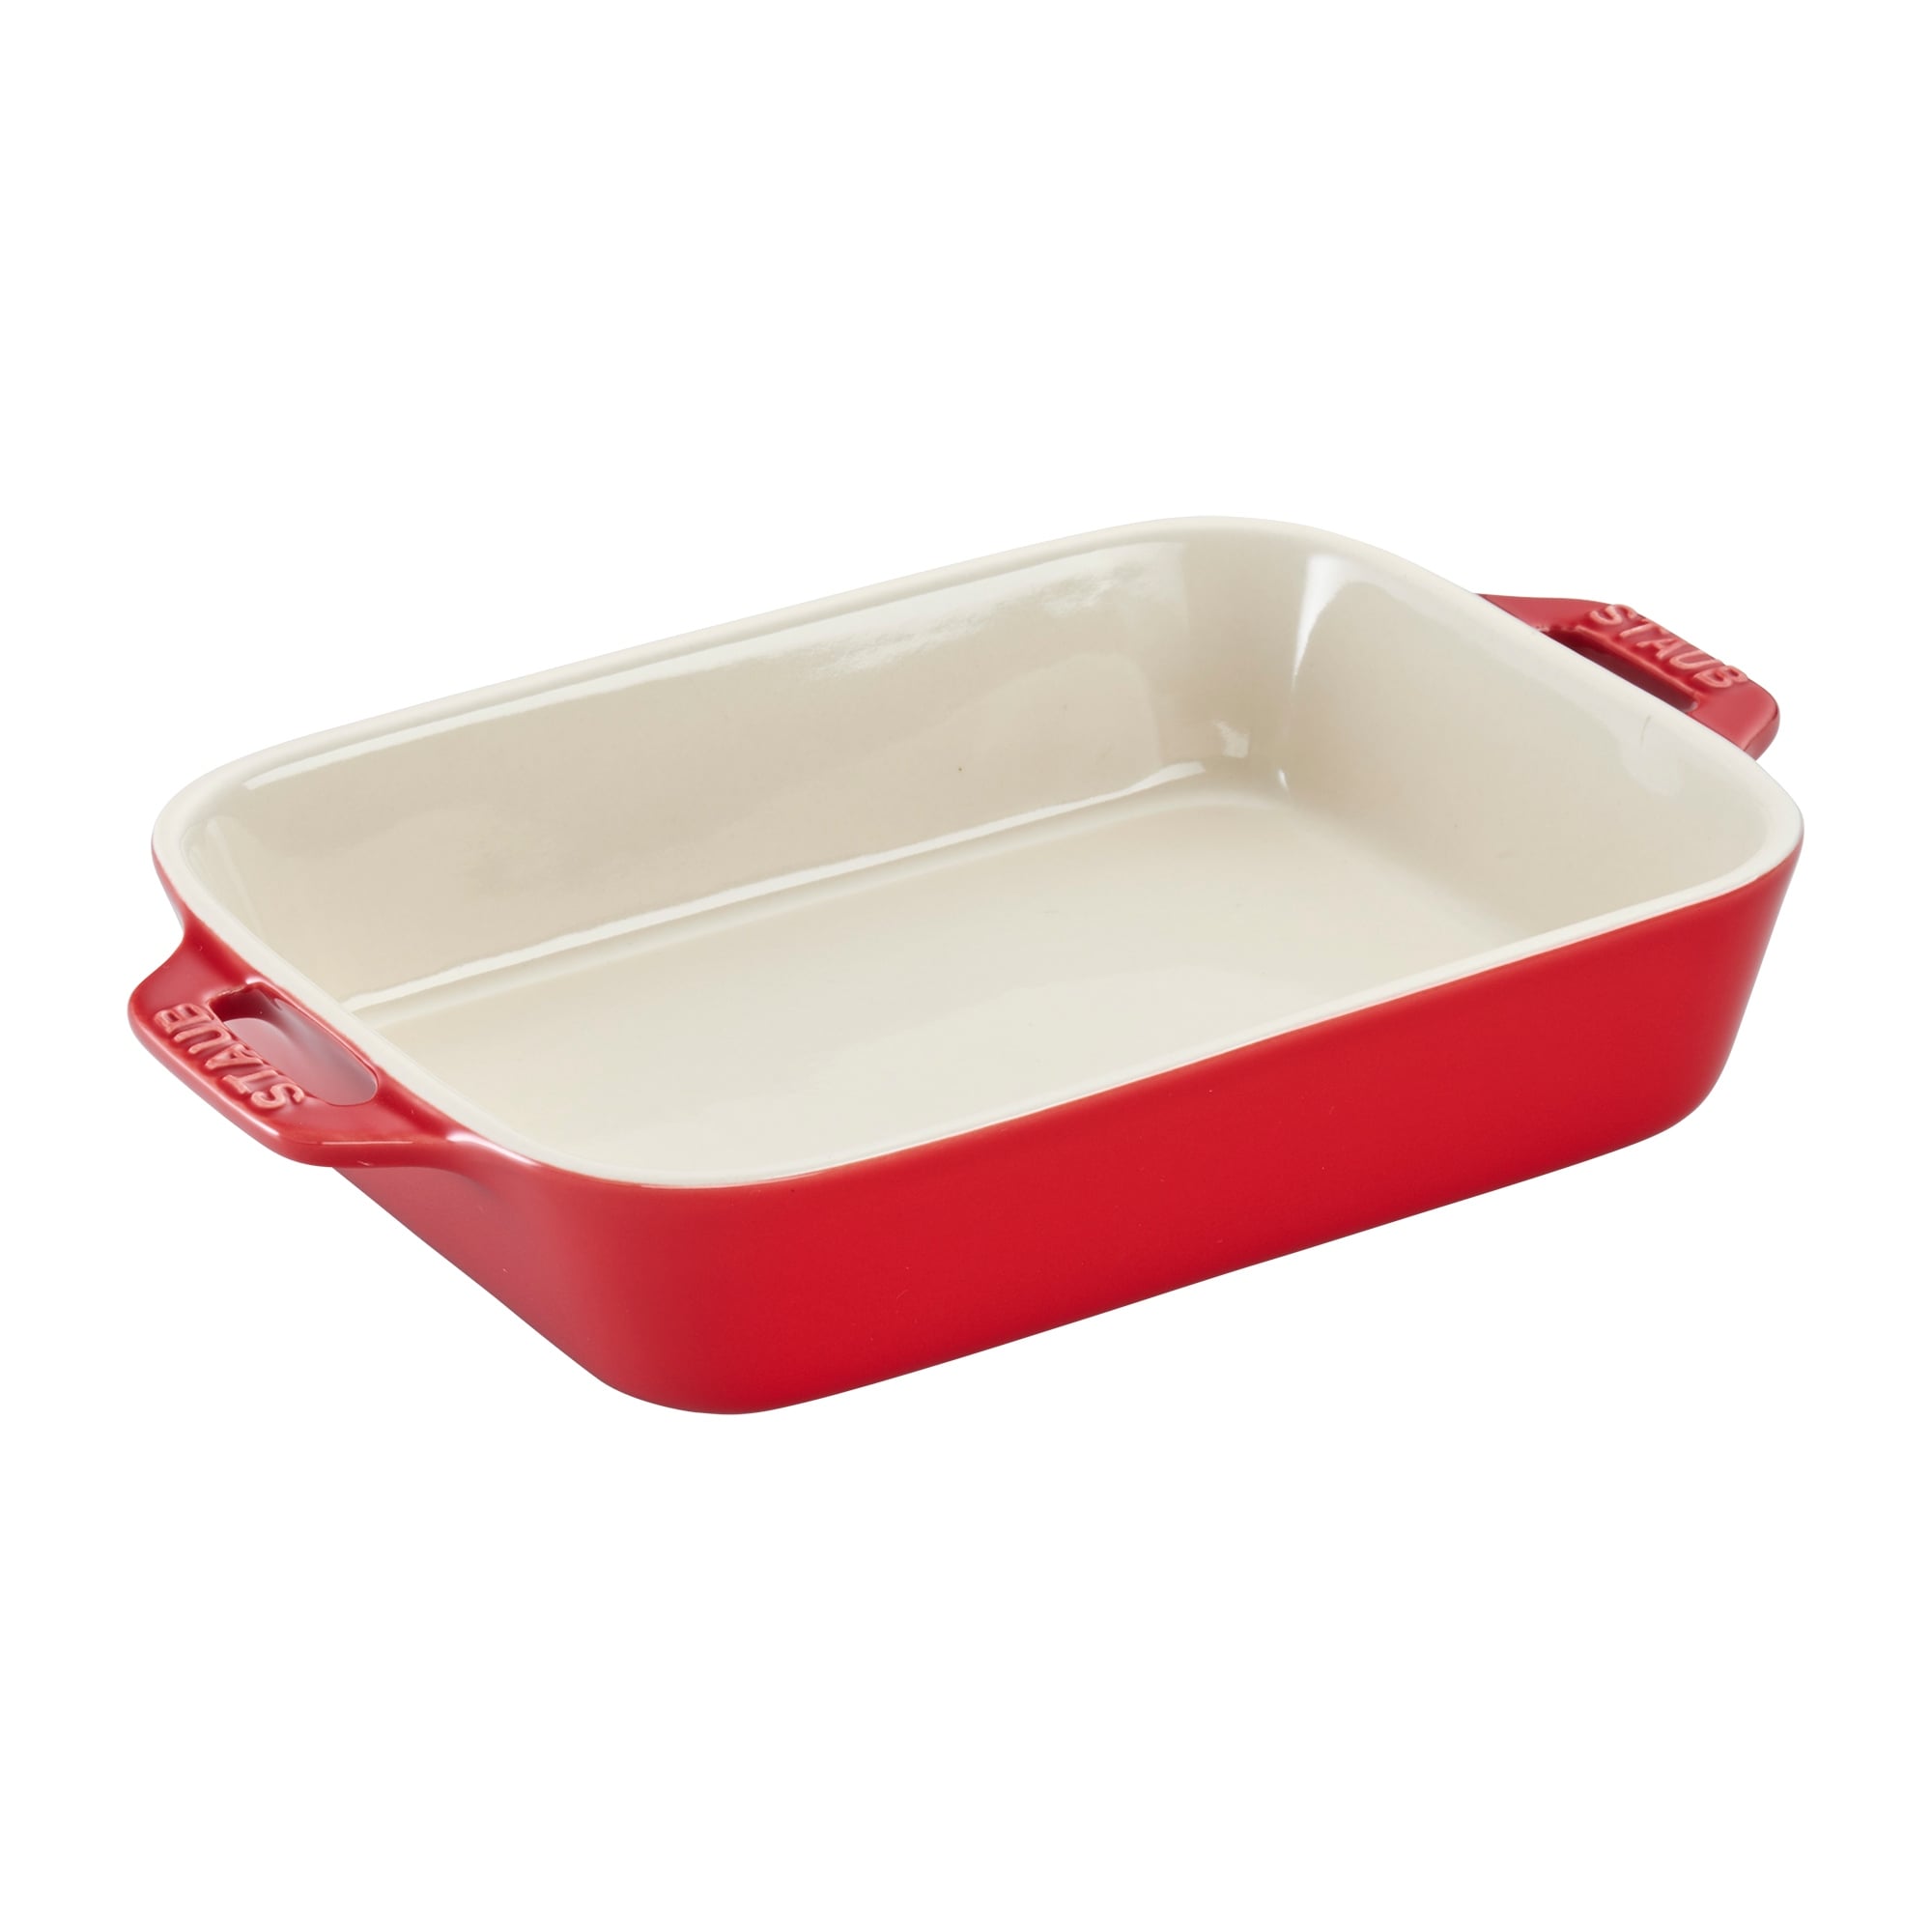 https://ak1.ostkcdn.com/images/products/is/images/direct/0d44c08c6a609875be81d3d7ee3db5cfc3614eb2/Staub-Ceramics-4-pc-Baking-Pans-Set%2C-Casserole-Dish-with-Lid%2C-Brownie-Pan.jpg